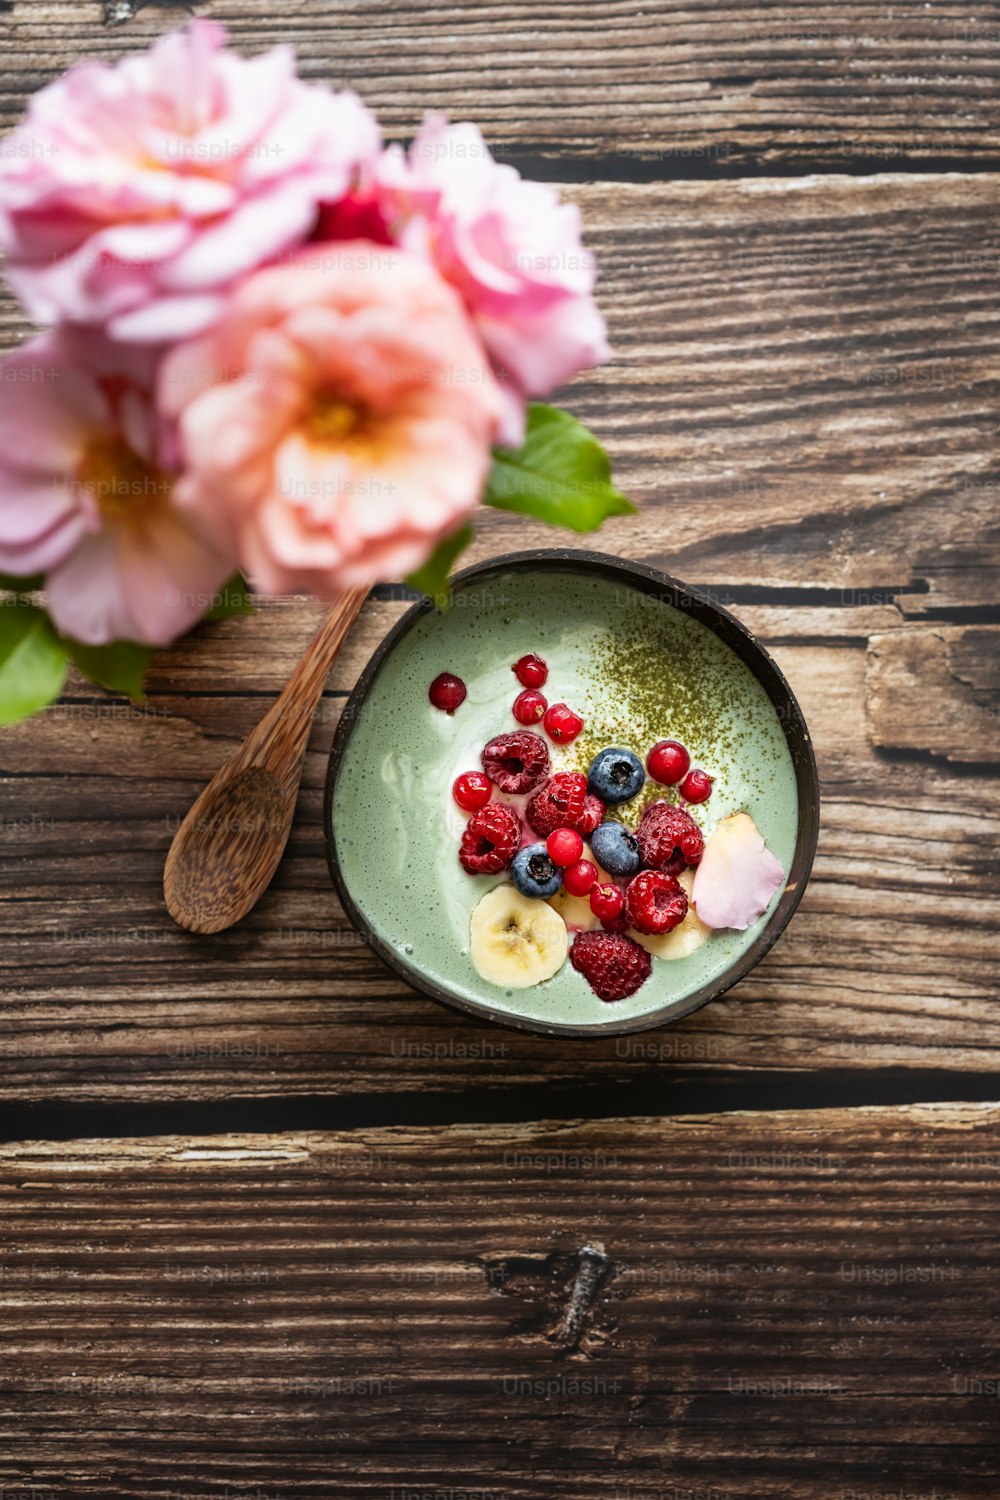 a bowl of berries and bananas on a wooden table